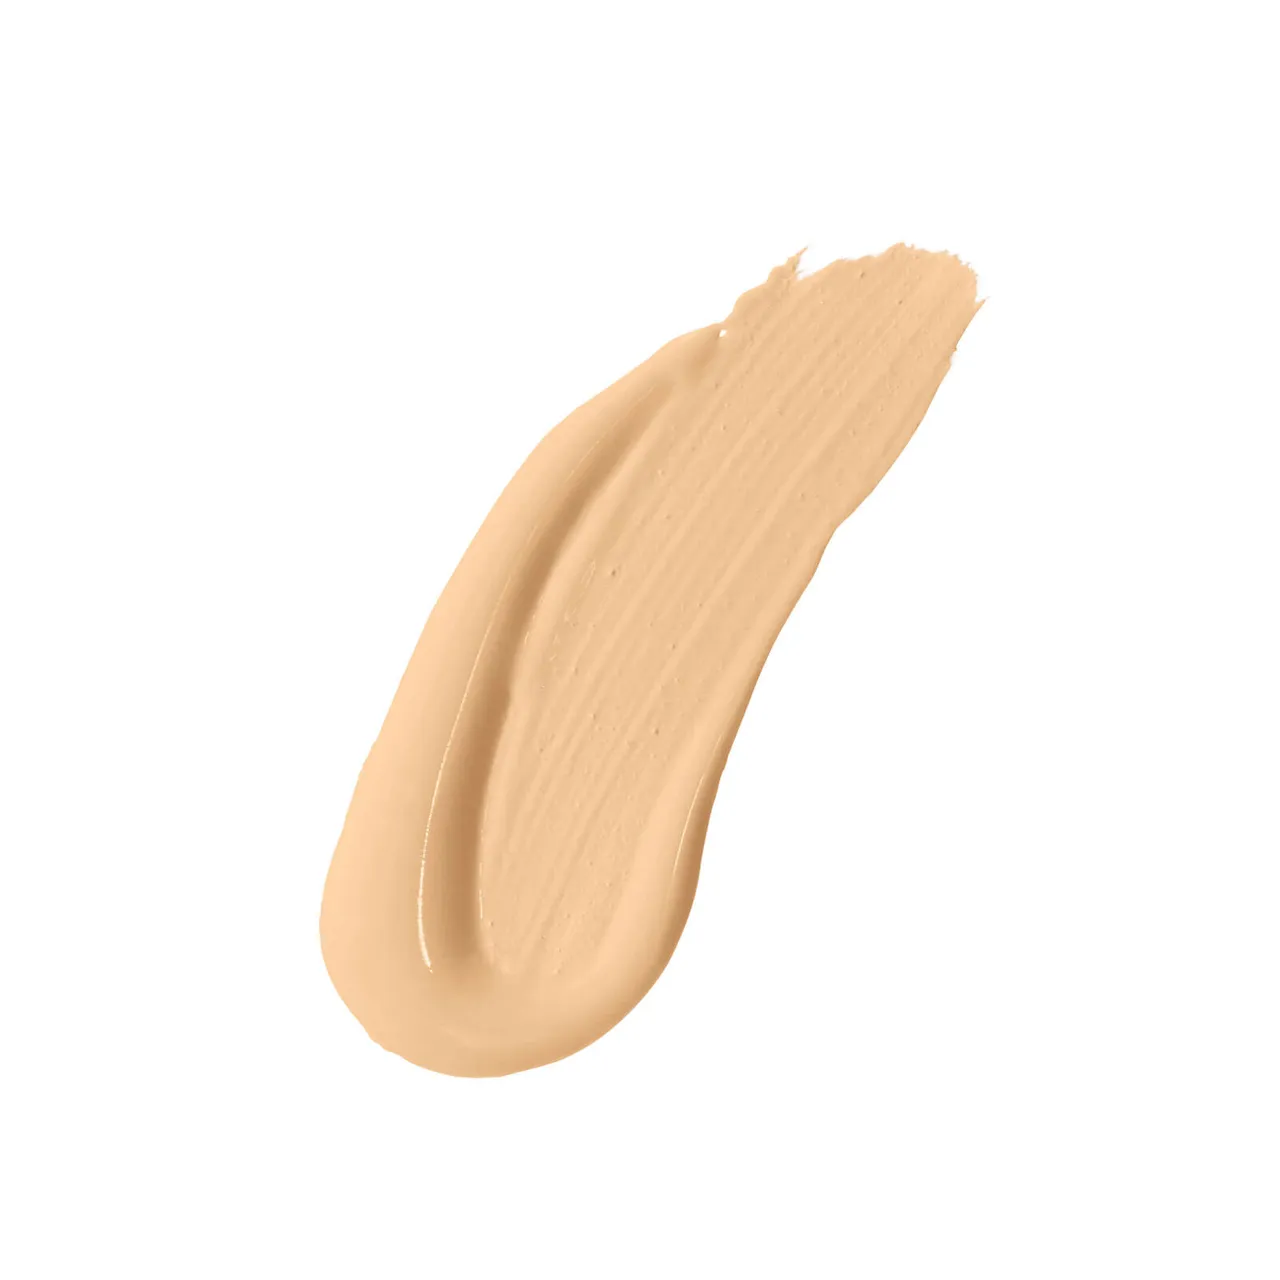 By Terry Light-Expert Click Brush Foundation 19.5ml (Various Shades) - 5. Peach Beige